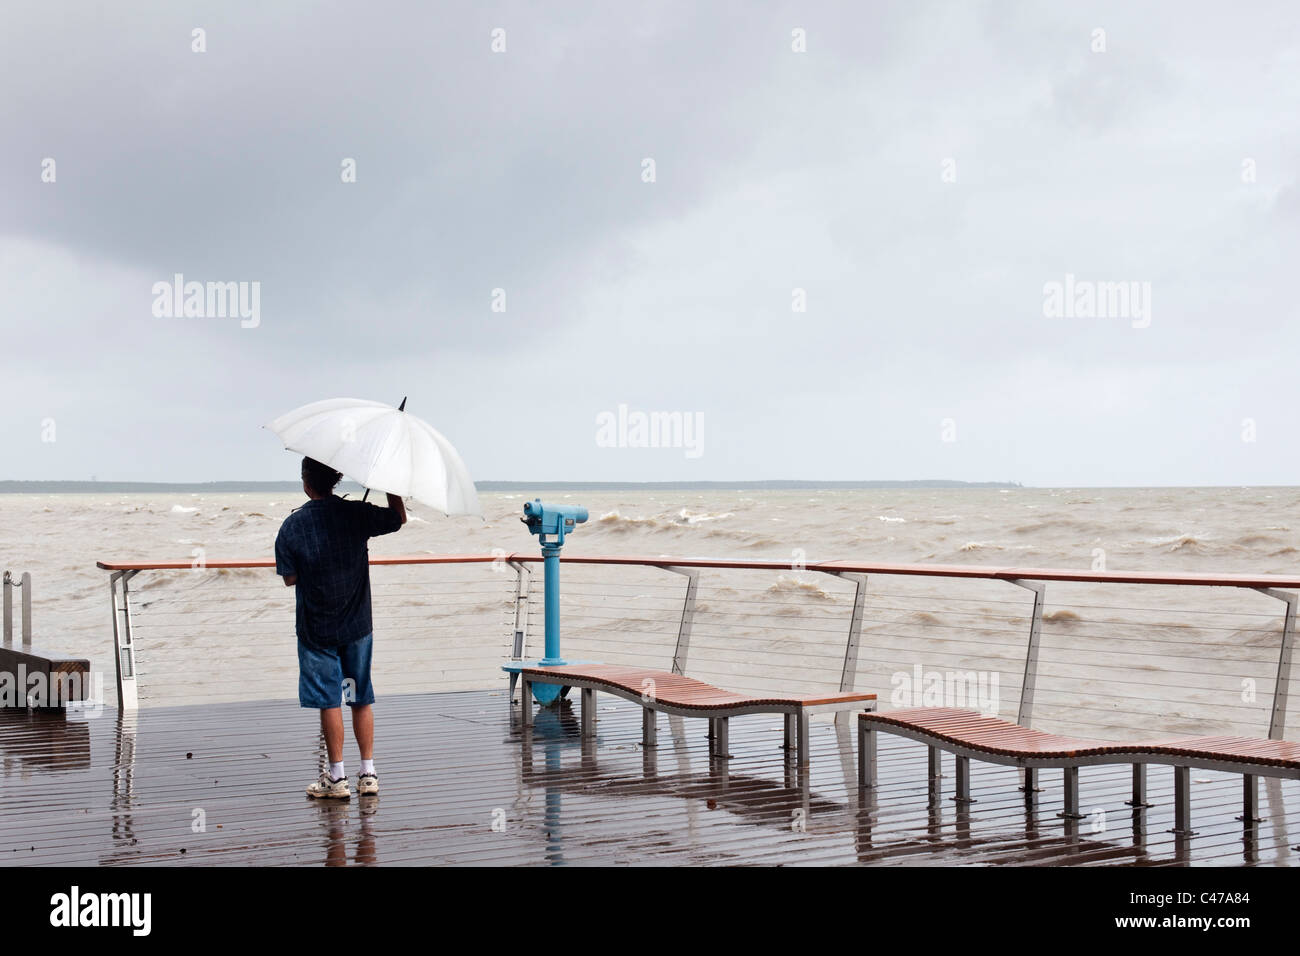 A man stands on the Esplanade boardwalk during stormy weather. Cairns, Queensland, Australia Stock Photo